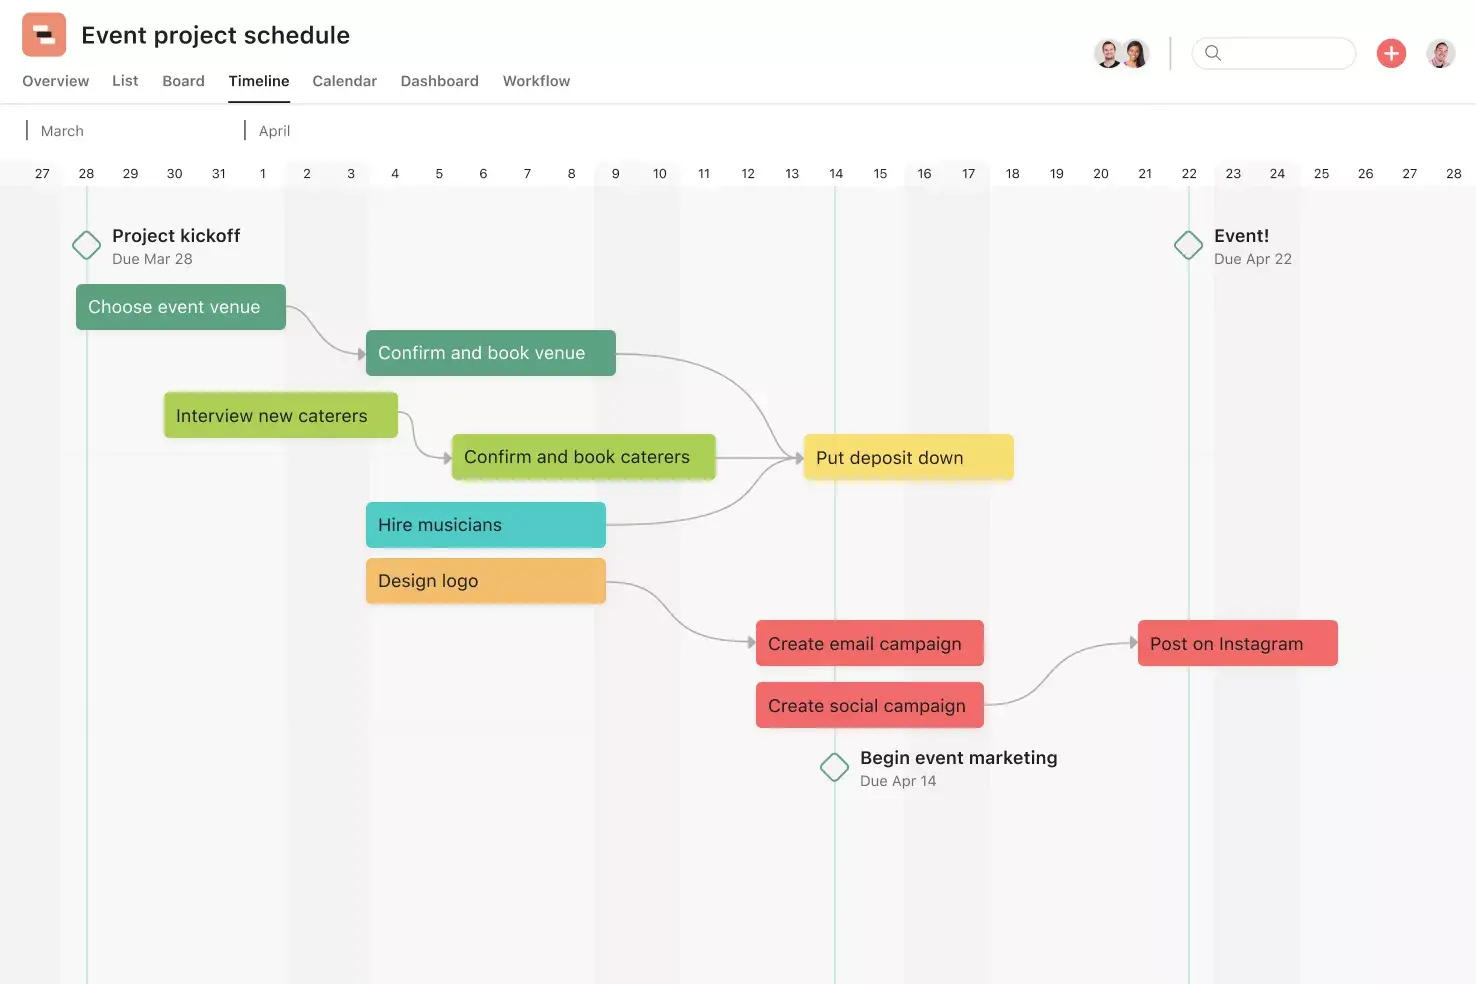 [Product ui] Event project schedule in Asana (timeline view)